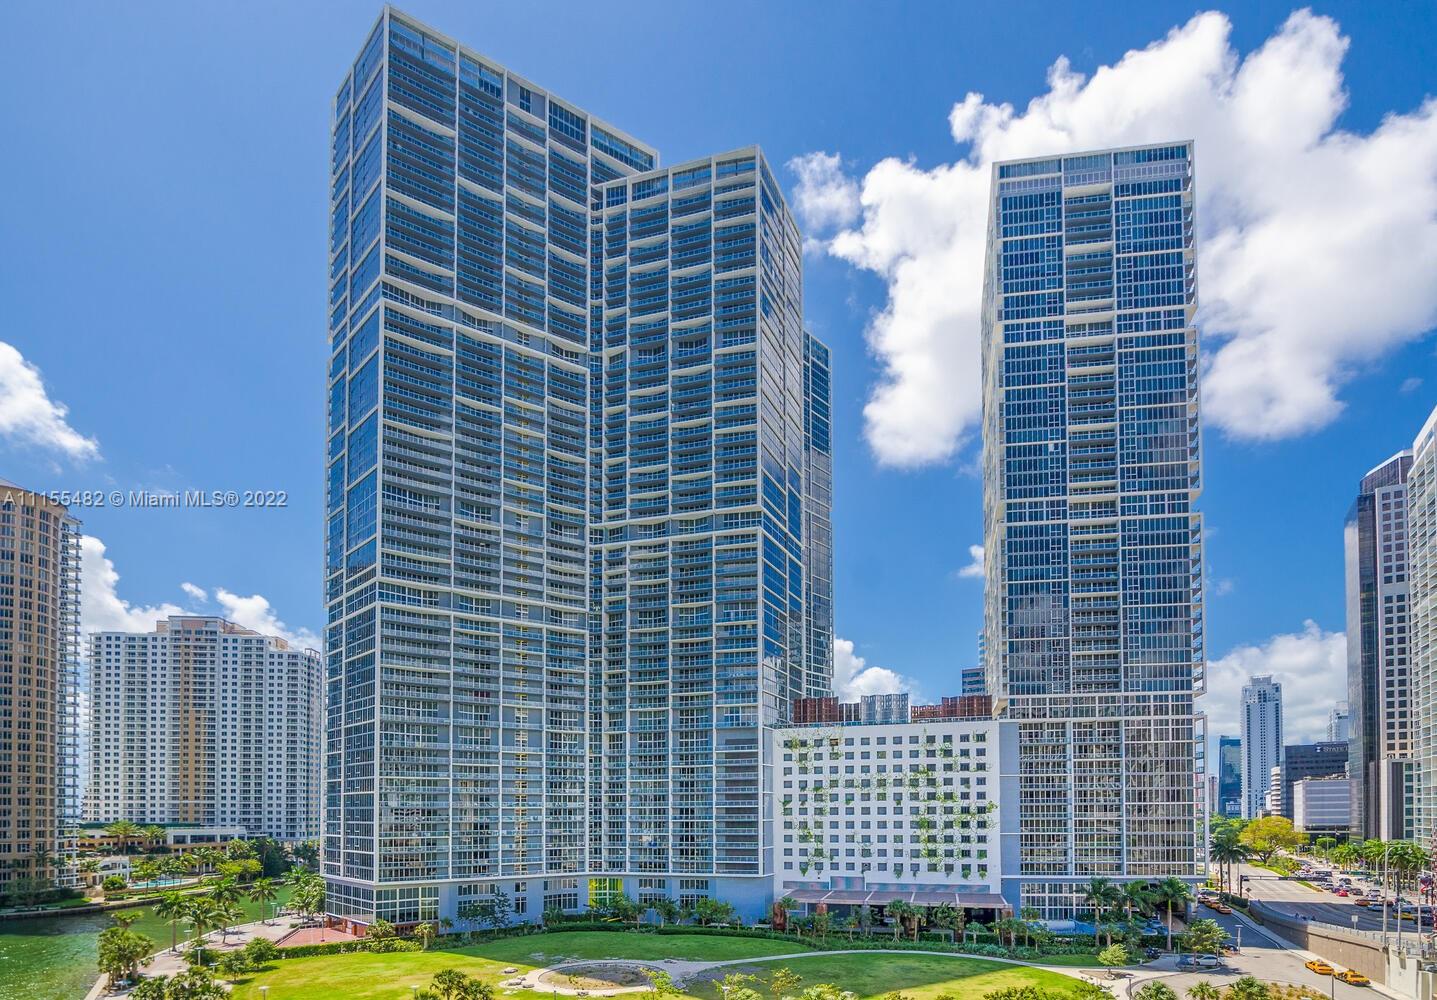 Located in the heart of Brickell/Downtown this 1 bedroom 1 bathroom condo is tastefully furnished and situated on the 46th floor with magnificent bay & city views. Living in the Icon offers a number of amenities which includes access to the pool and gym of the W hotel. Take one of the elevators down and you are within walking distance to hundreds of shops, restaurants and bars offered by Brickell City Center, Mary Brickell Village and the Miami River Walk! Jump on the people mover and within minutes you are at American airlines arena, Frost Museum, Adrienne Arsht Center for the Performing Arts and Bayside mall! Don’t miss out on the complete Miami experience.